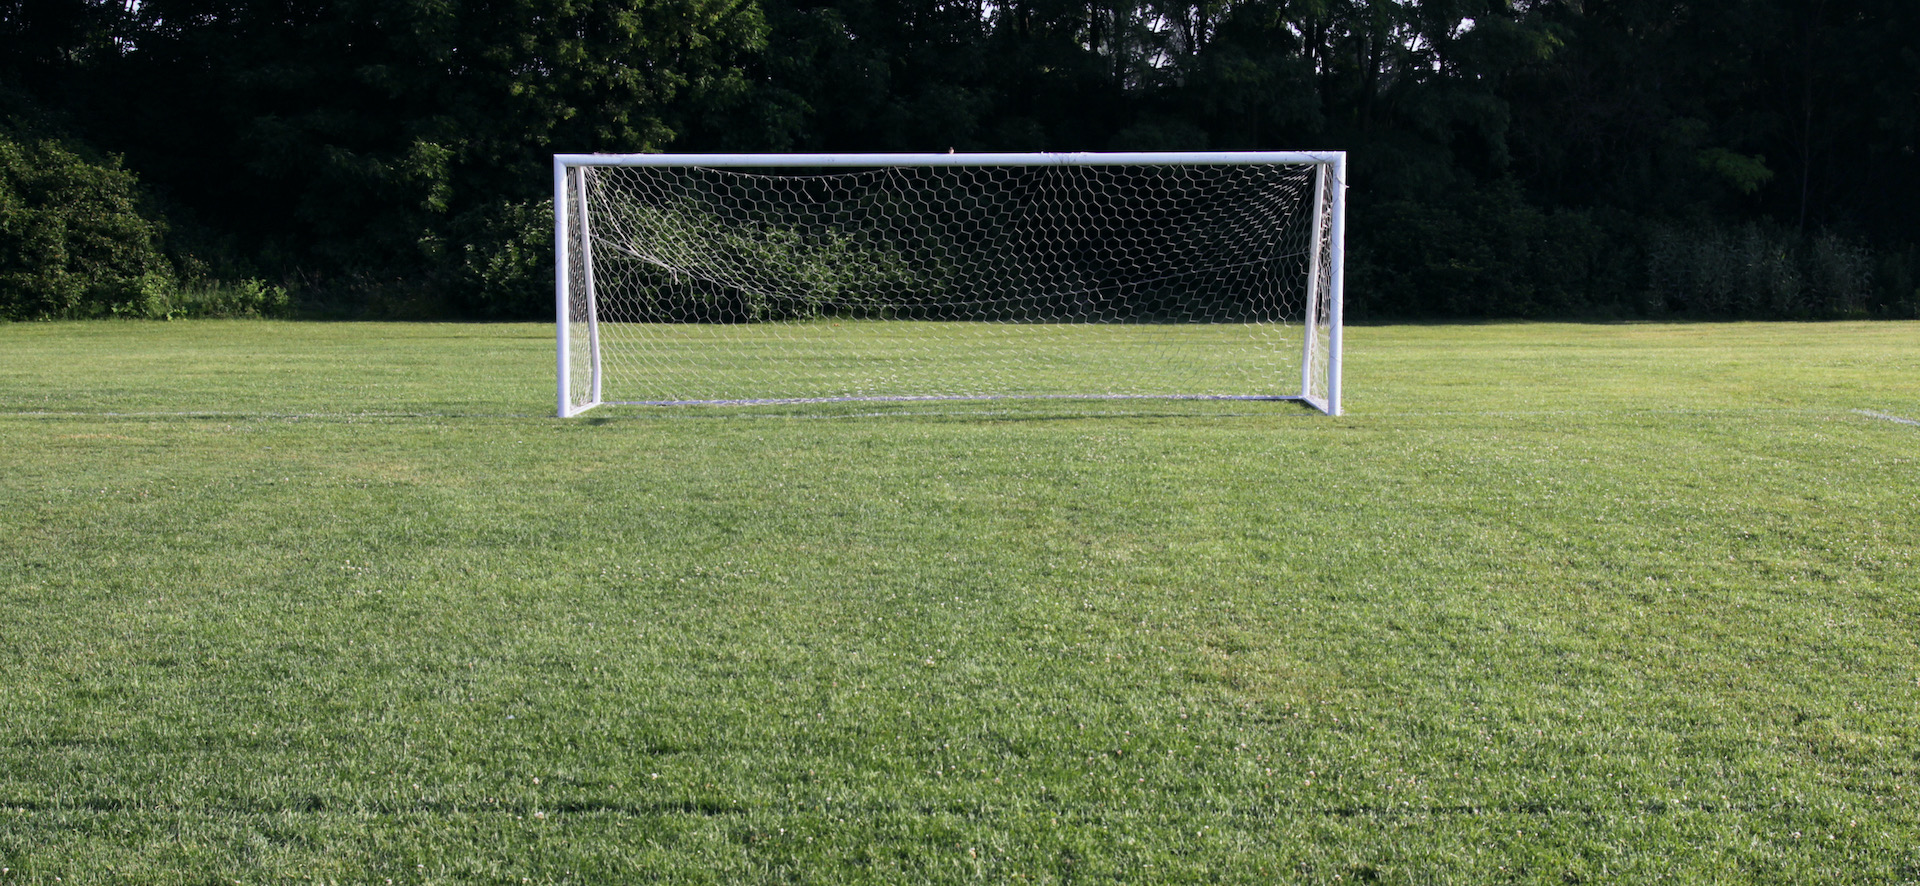 An empty, grass football field. The camera is looking at an open goalmouth.